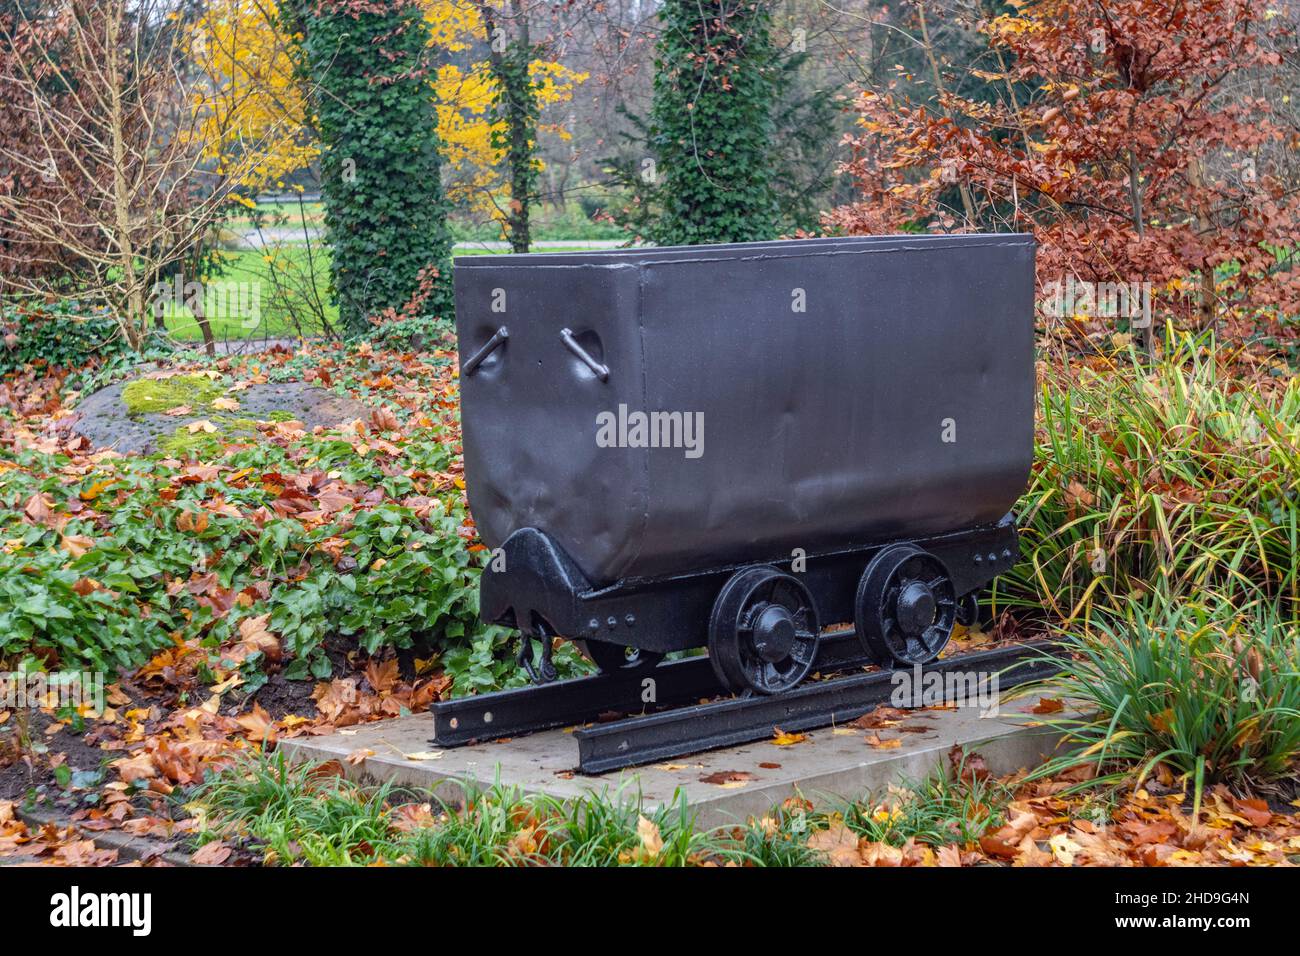 Metallic monument of commemorating the coal mining history in a park in Germany Stock Photo